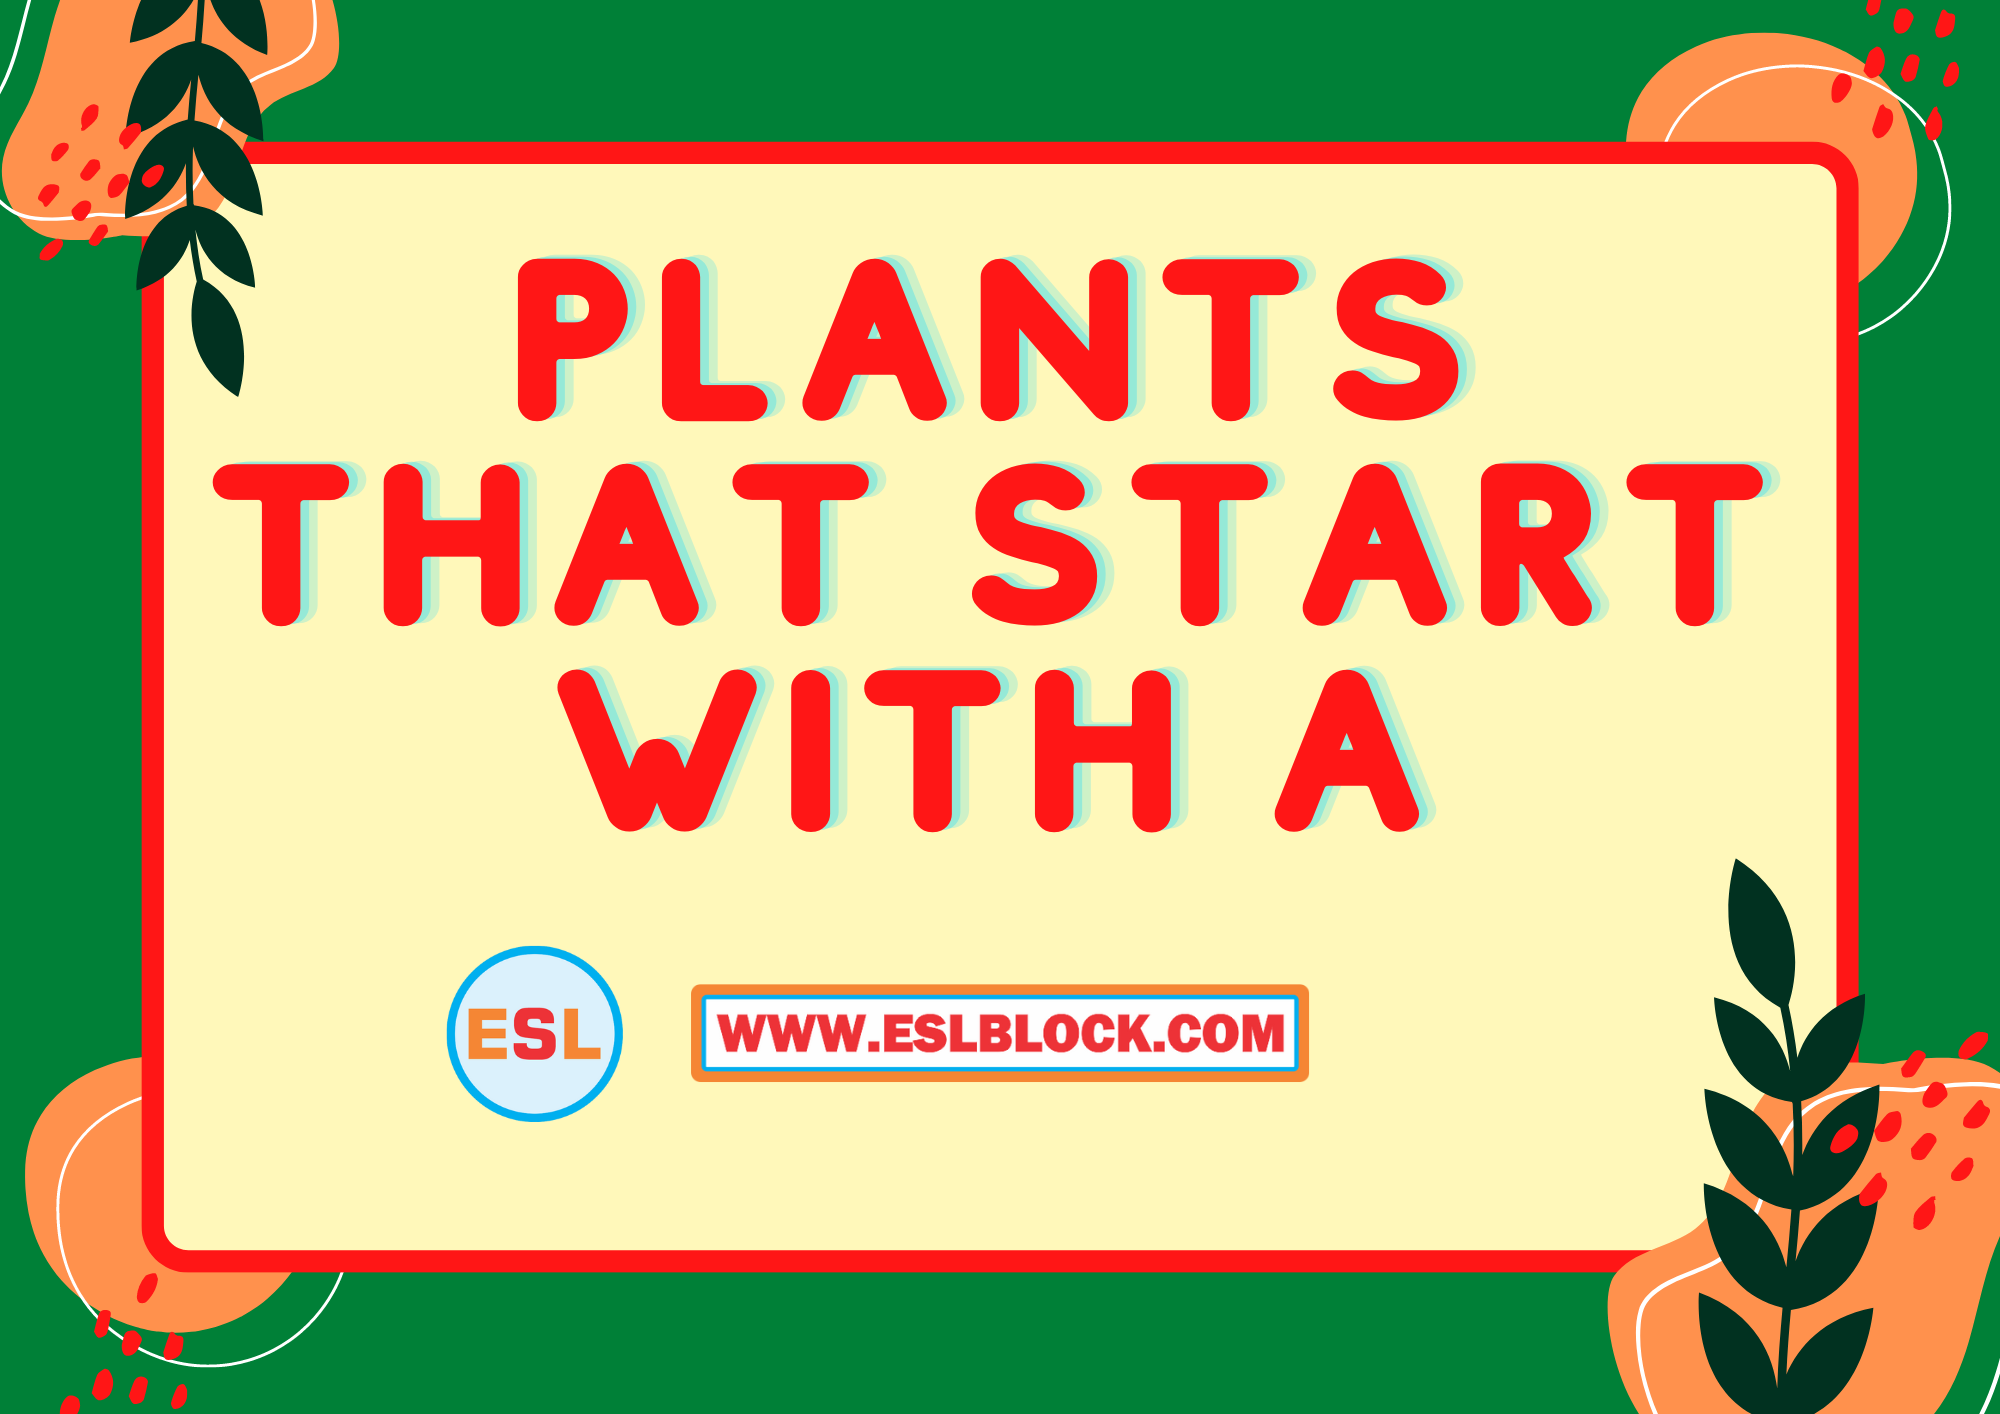 4 Letter Plants, 5 Letter Plants Starting With A, A Plants, A Plants in English, A Plants Names, English, English Grammar, English Vocabulary, English Words, List of Plants That Start With A, Plants List, Plants Names, Plants That Start With A, Vocabulary, Words That Start With a